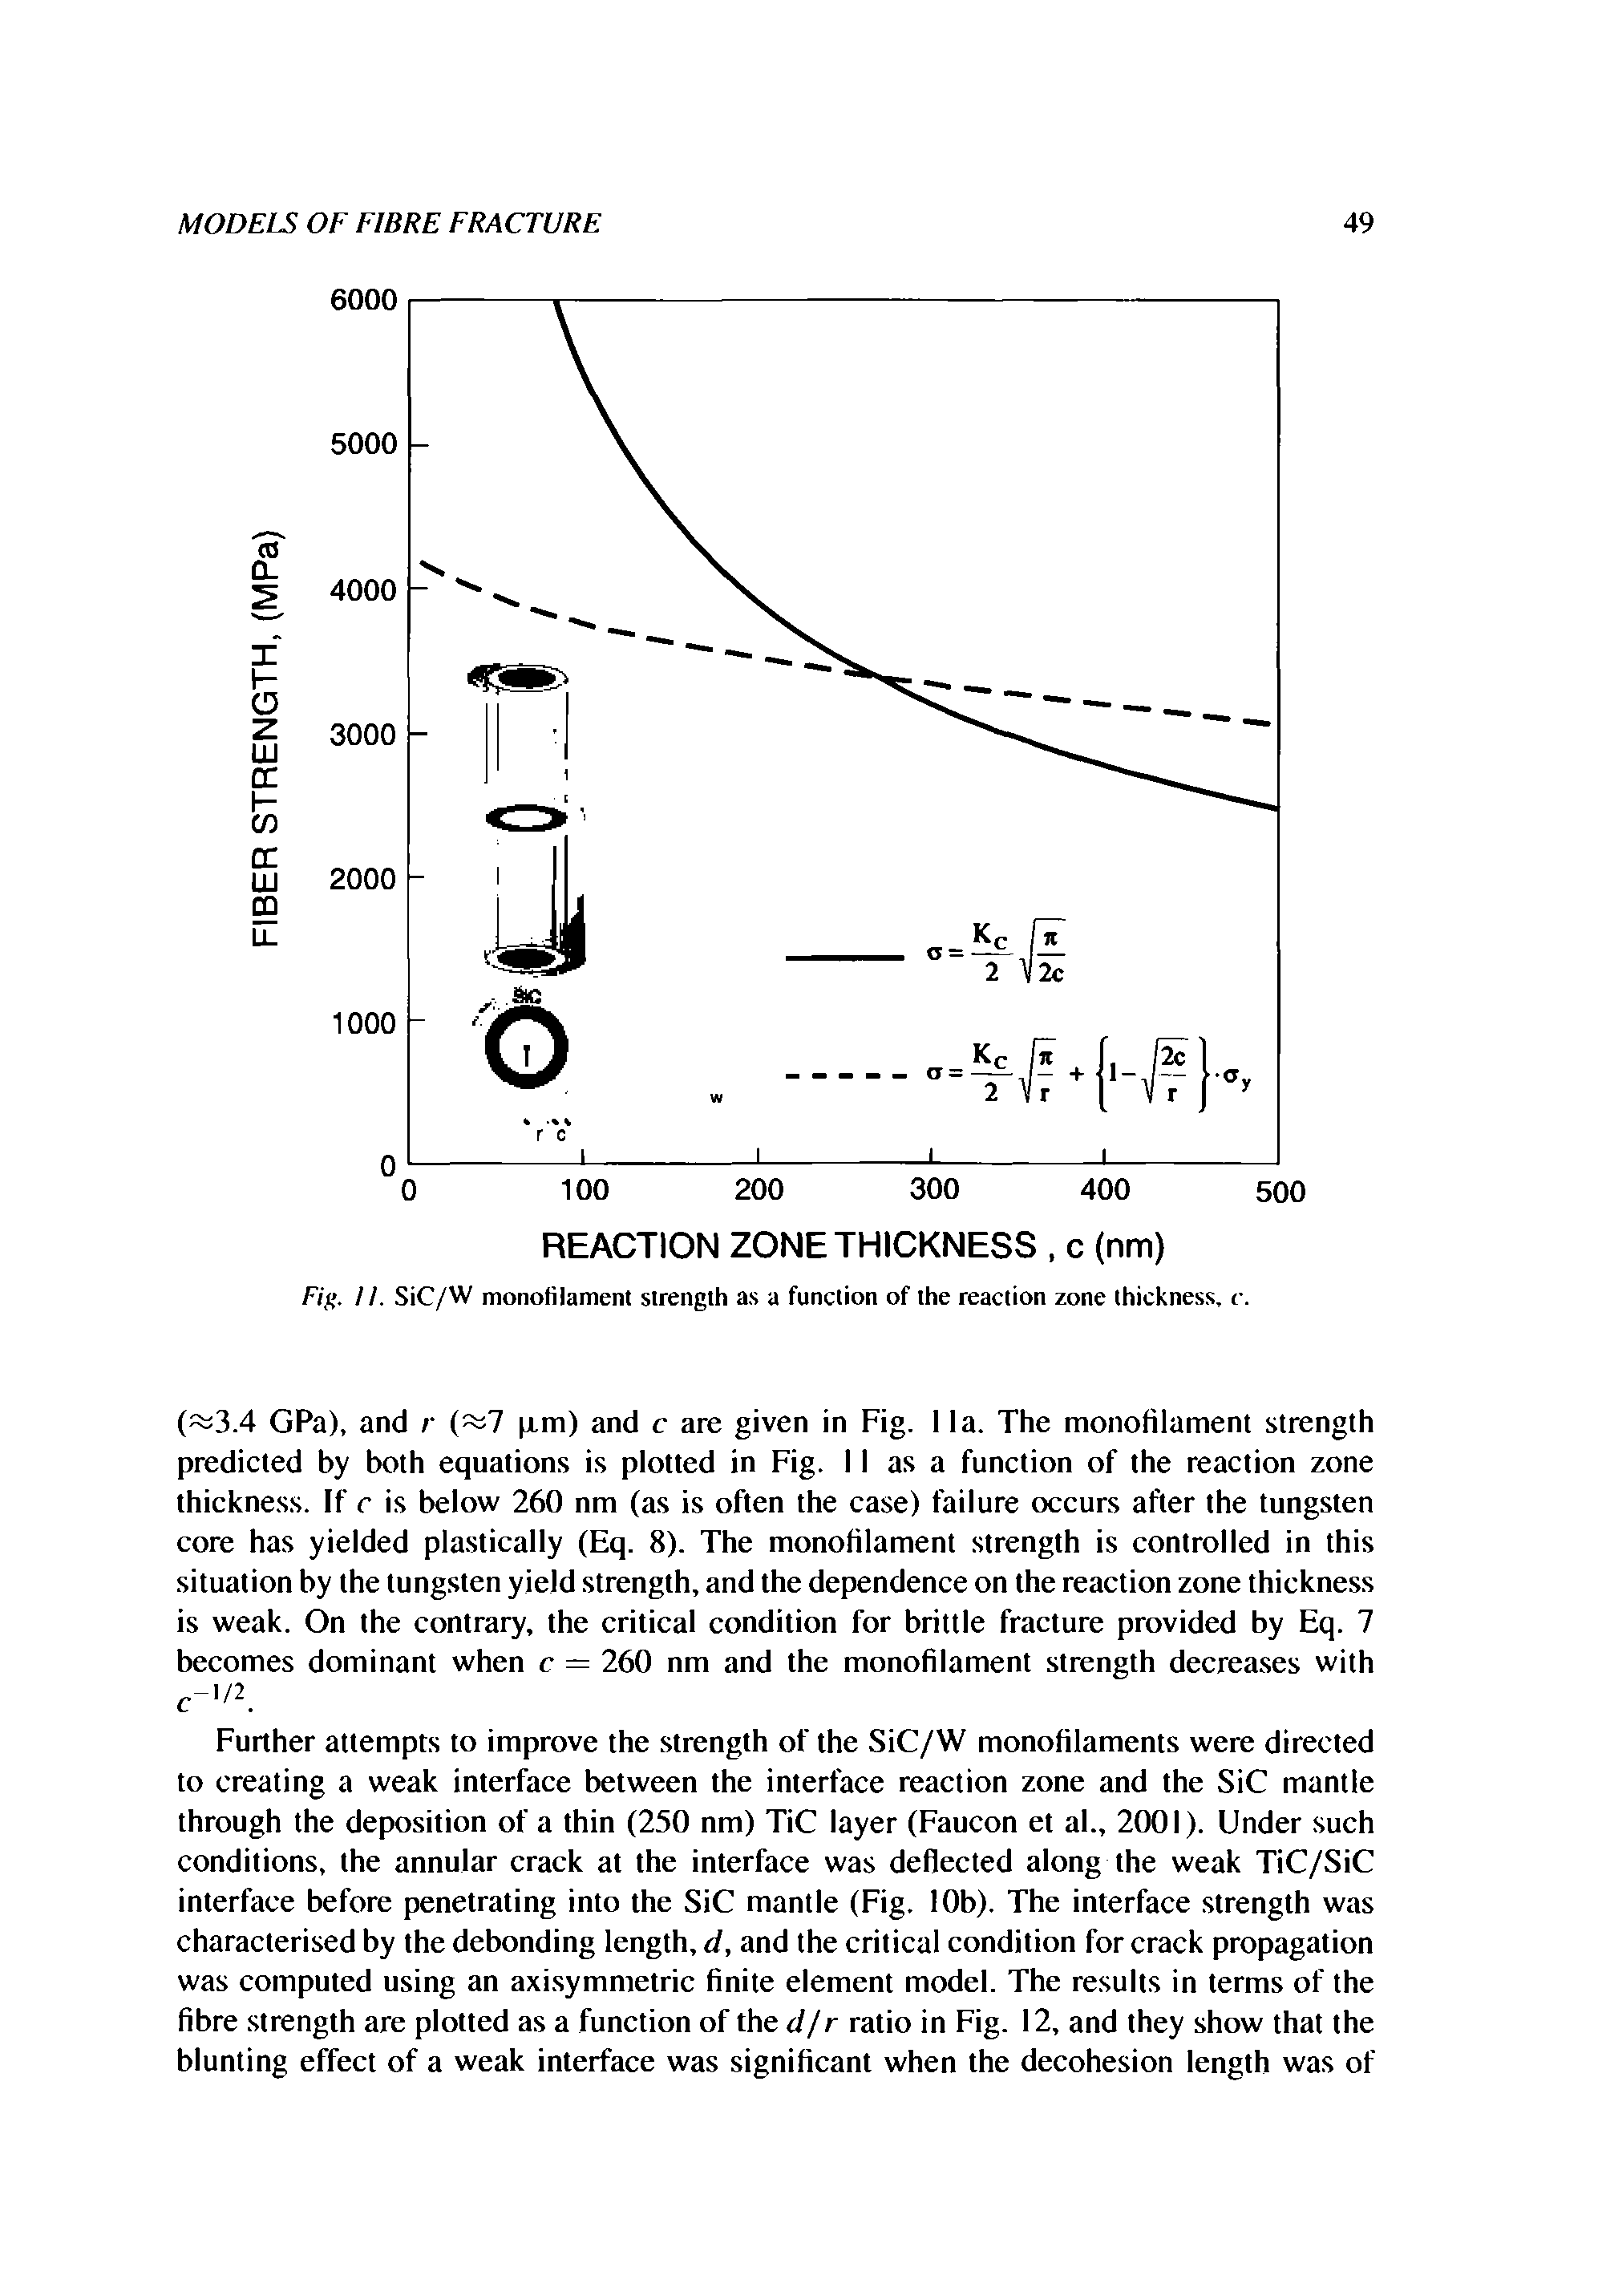 Fig. II. SiC/W monofilament strength as a function of the reaction zone thickness, c.